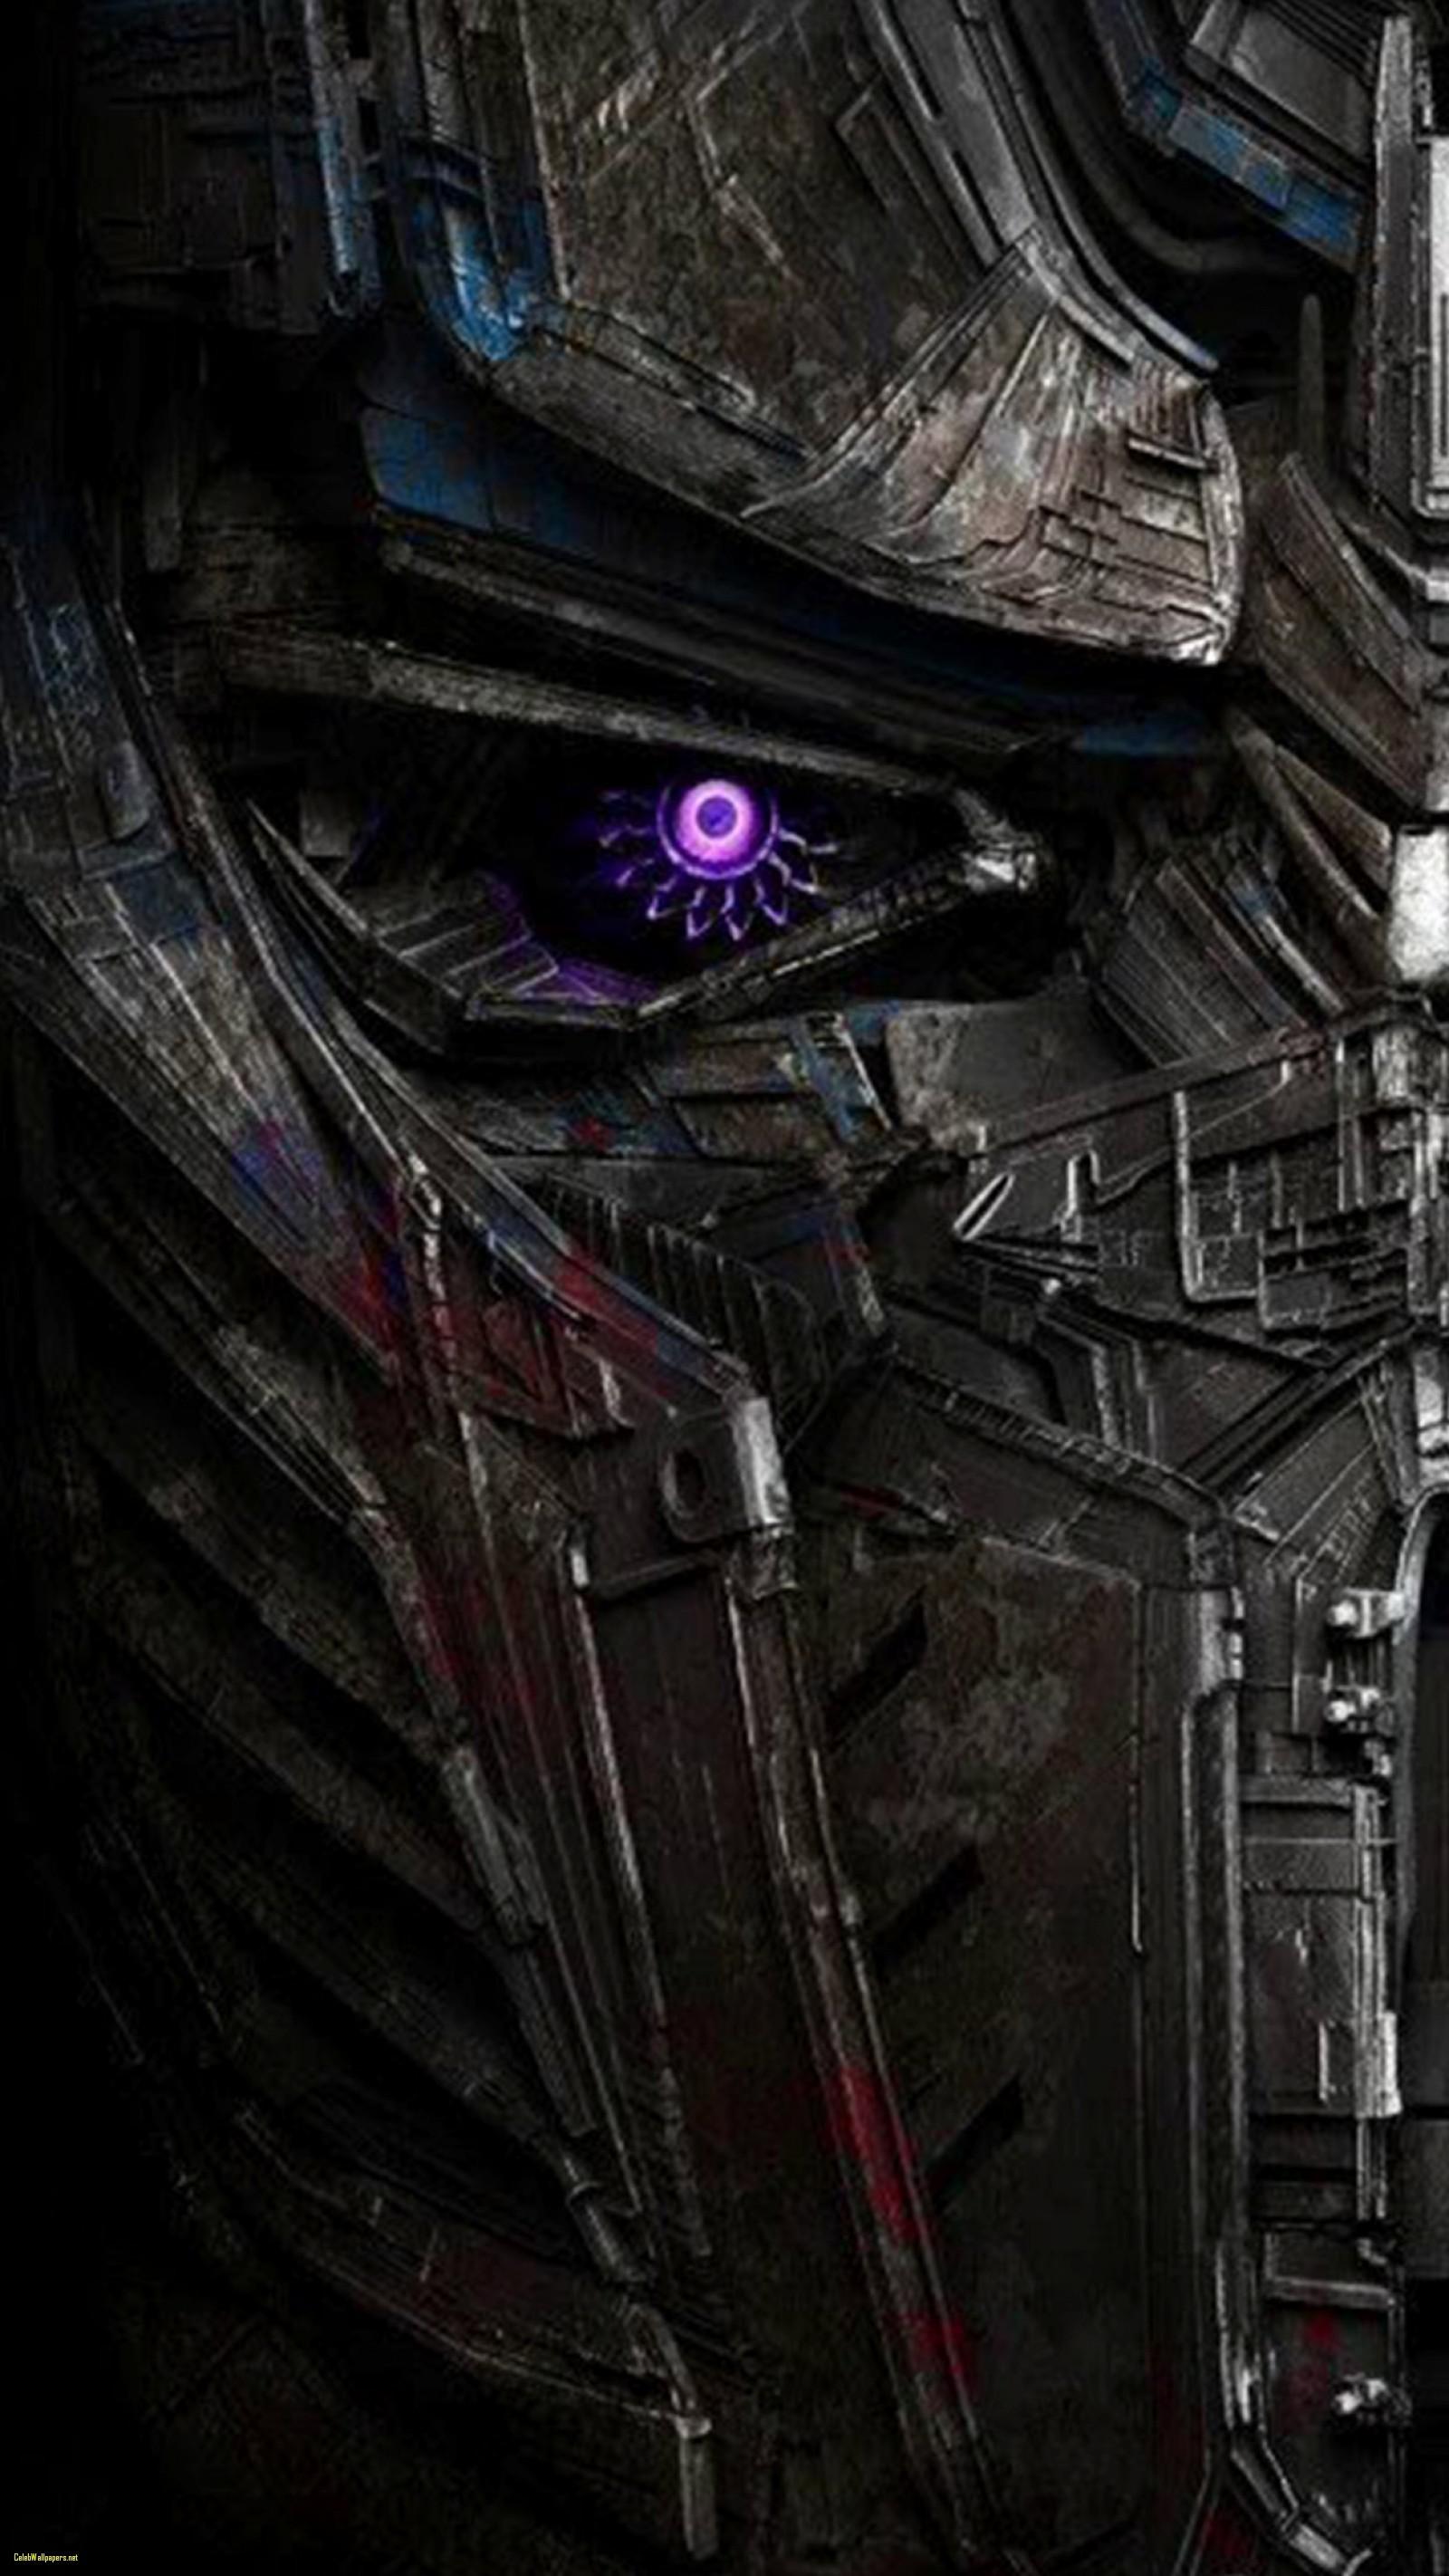 Optimus Prime Transformer The Last Knight 2017 iPhone7 Prime HD Wallpaper For Android HD Wallpaper